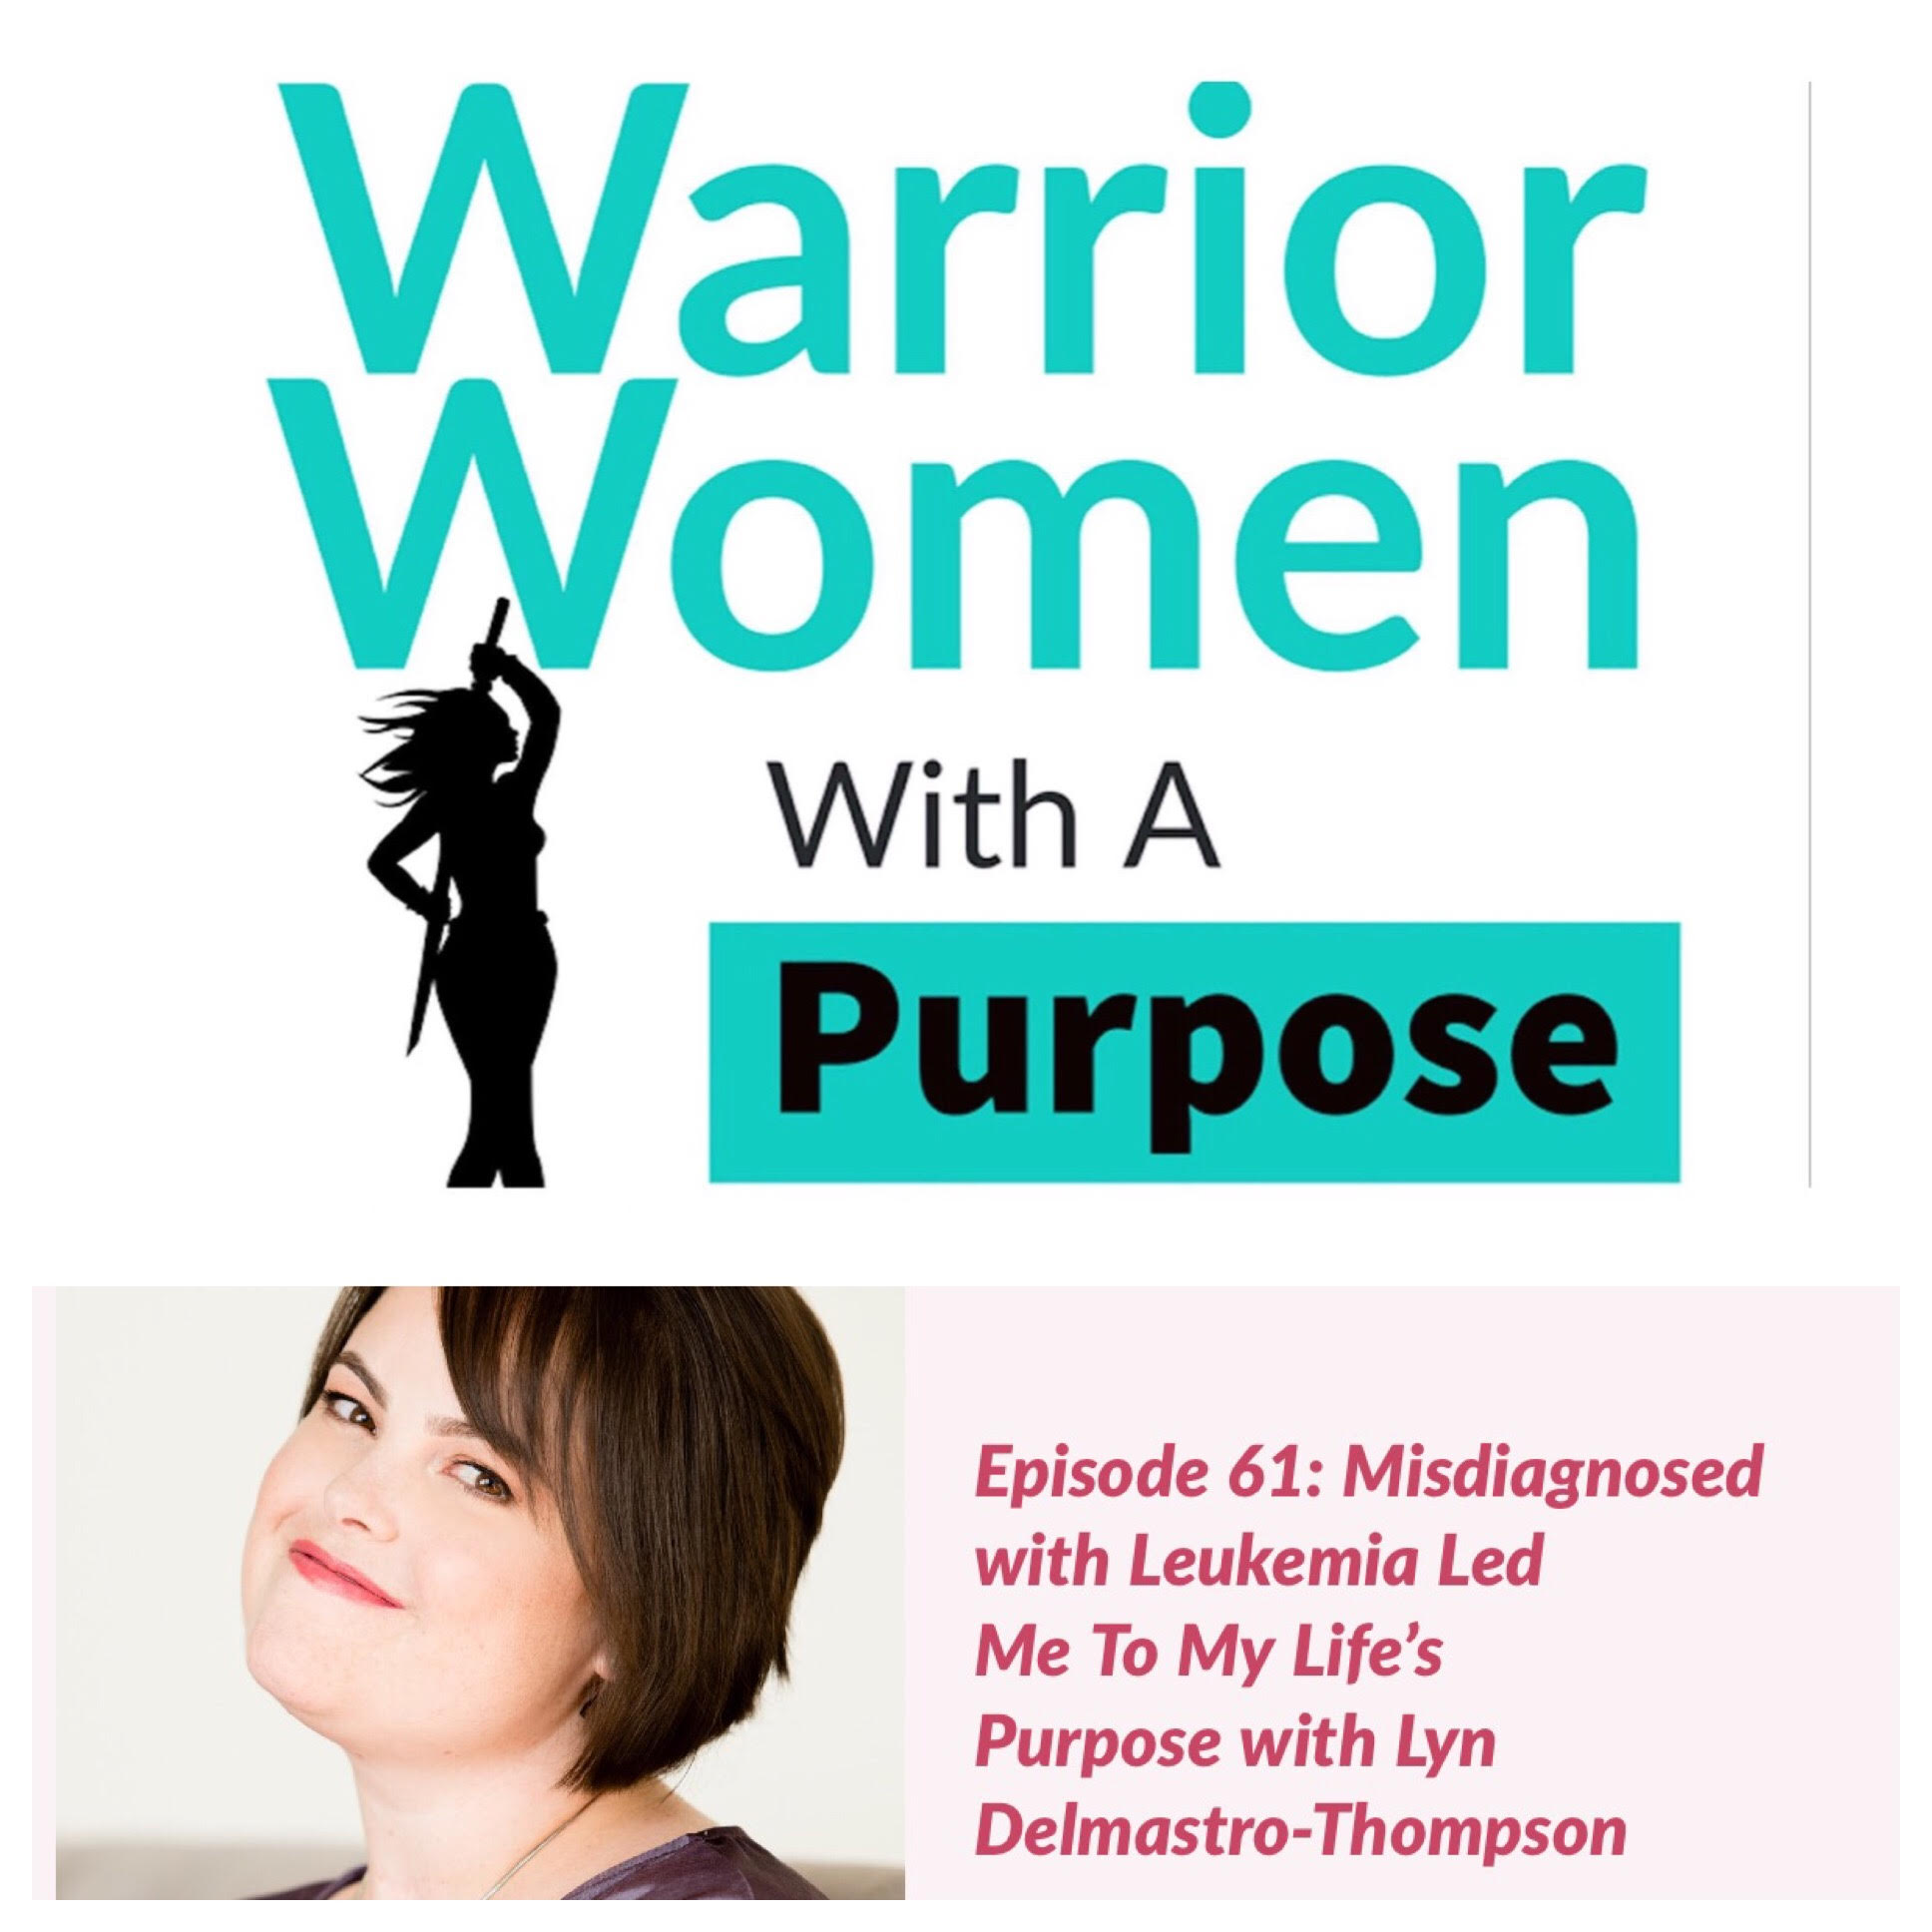 warrior women with a podcast interview